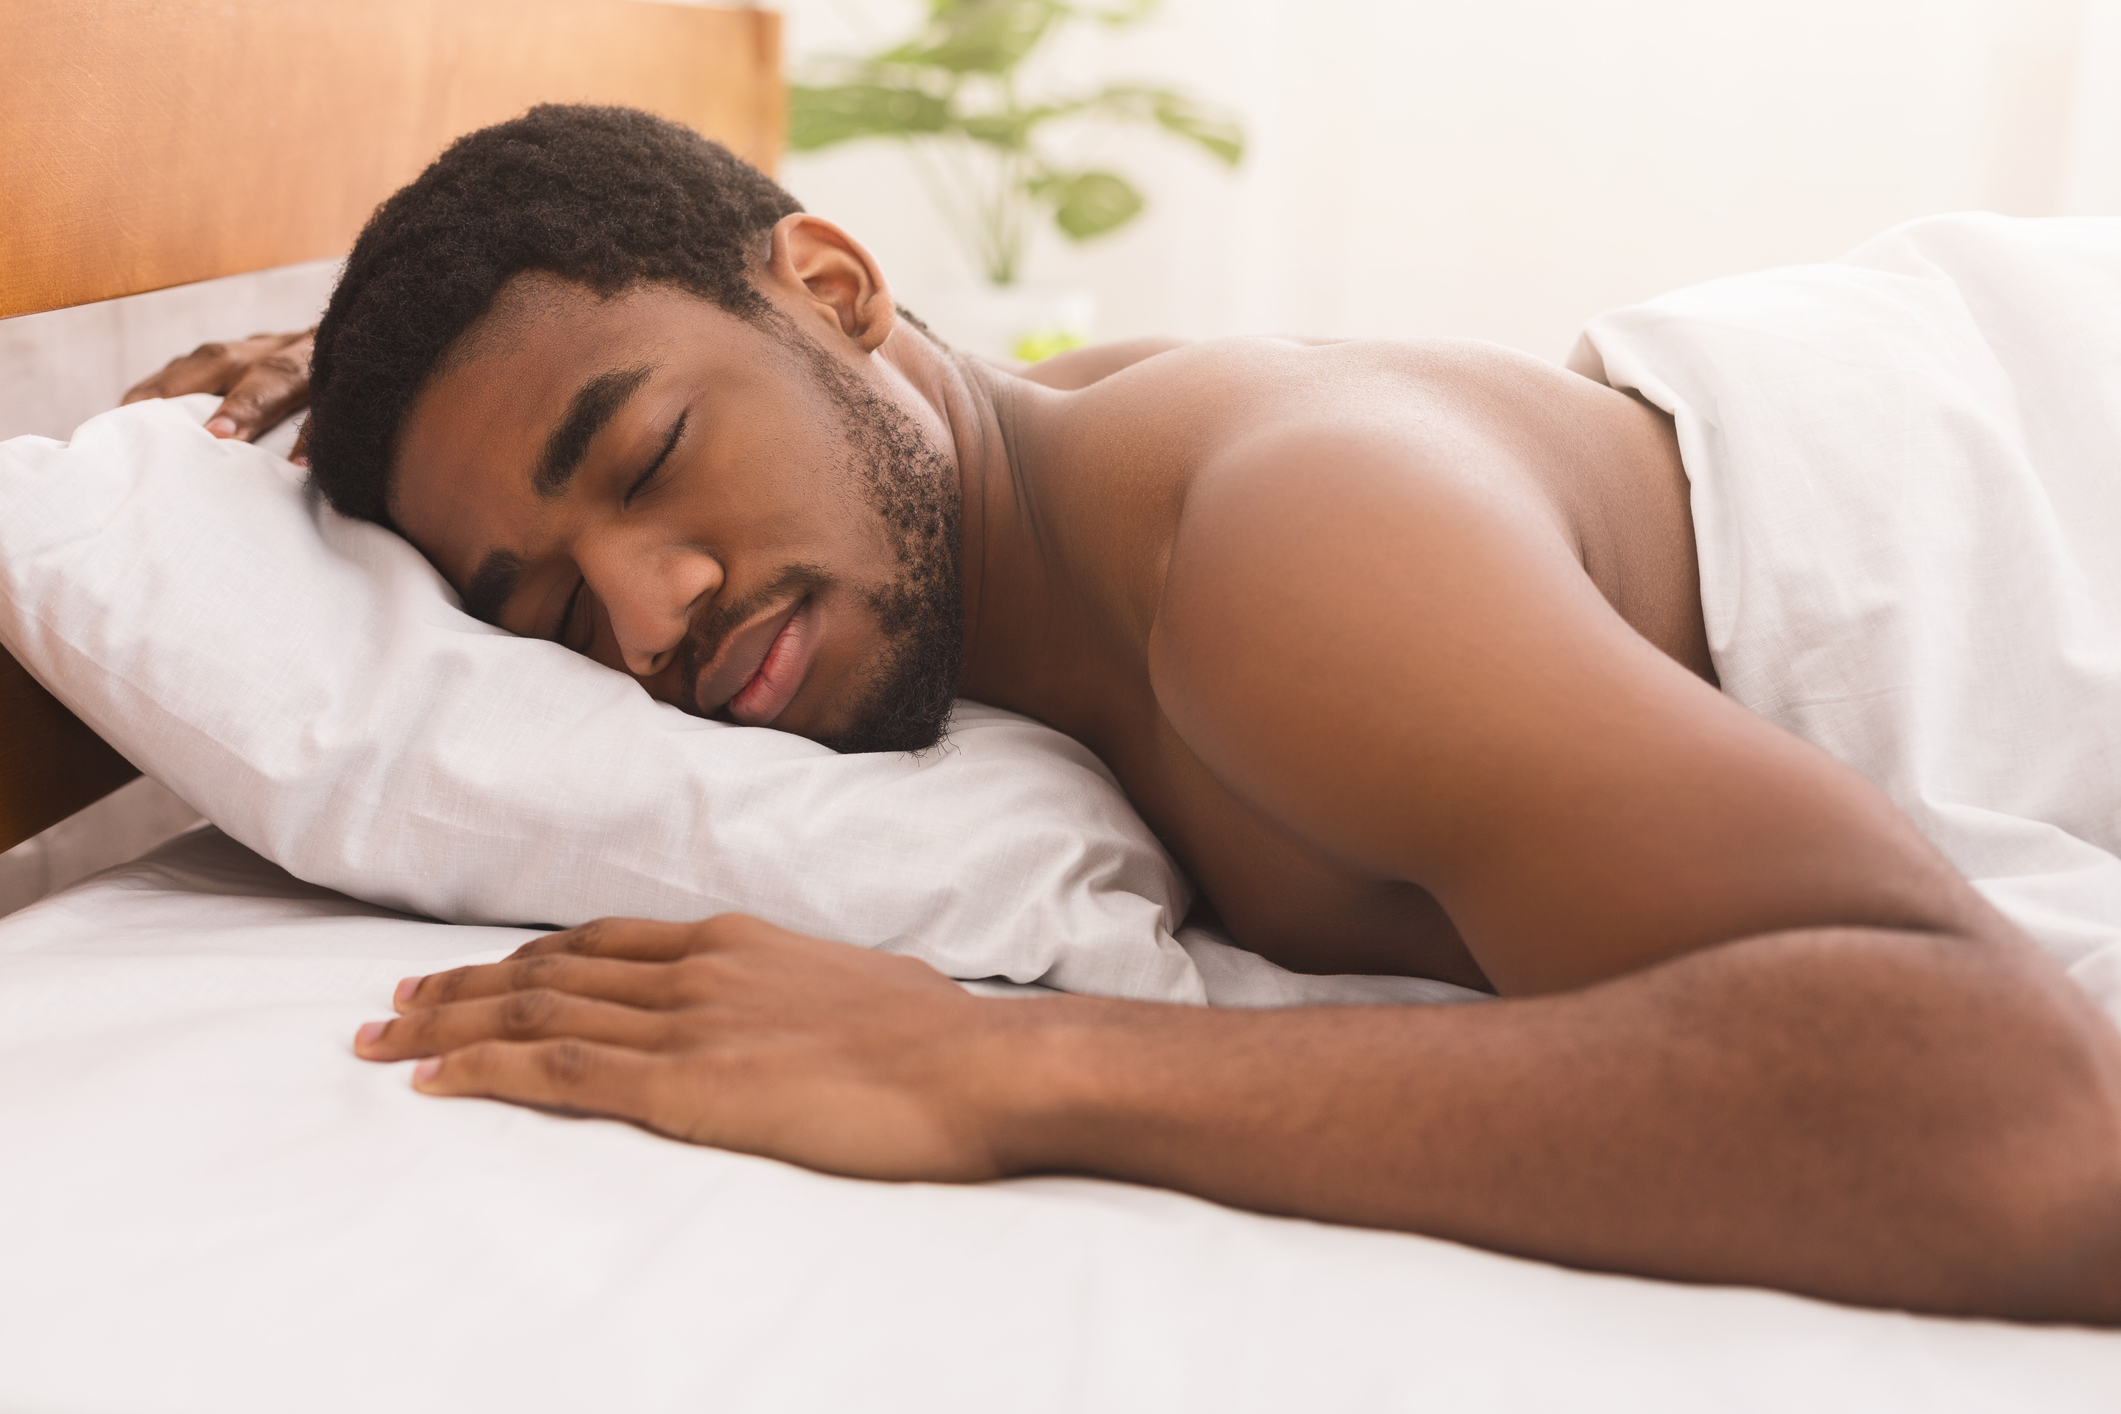 Sleeping Hot At Night Xxxx - Is Sleeping Naked Better for Your Health? | Sleep Foundation